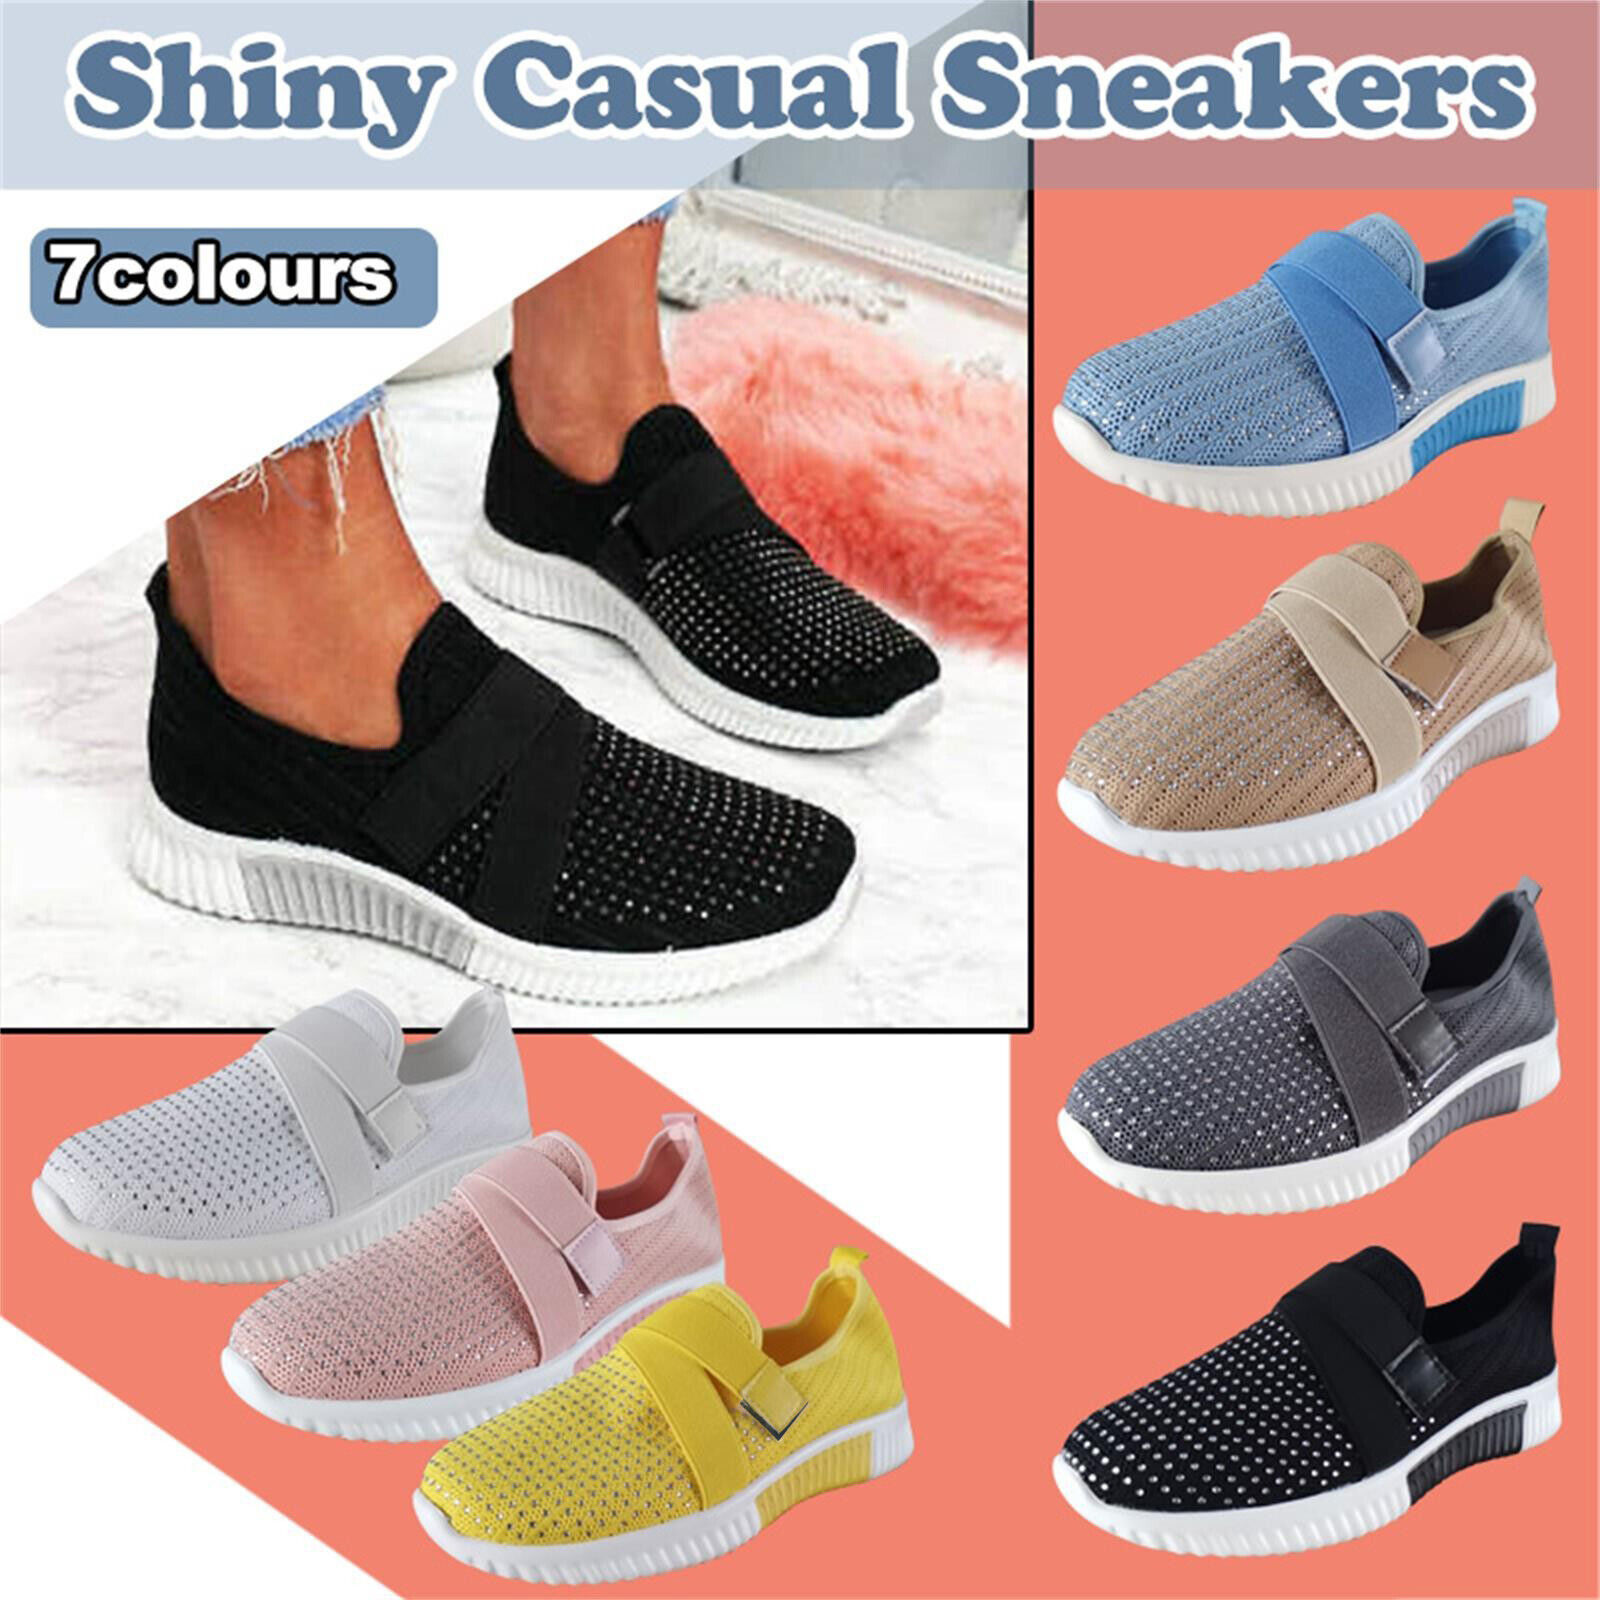 Sneaker Laces Women Fashion Women's Casual Shoes Breathable Slip-on Outdoor